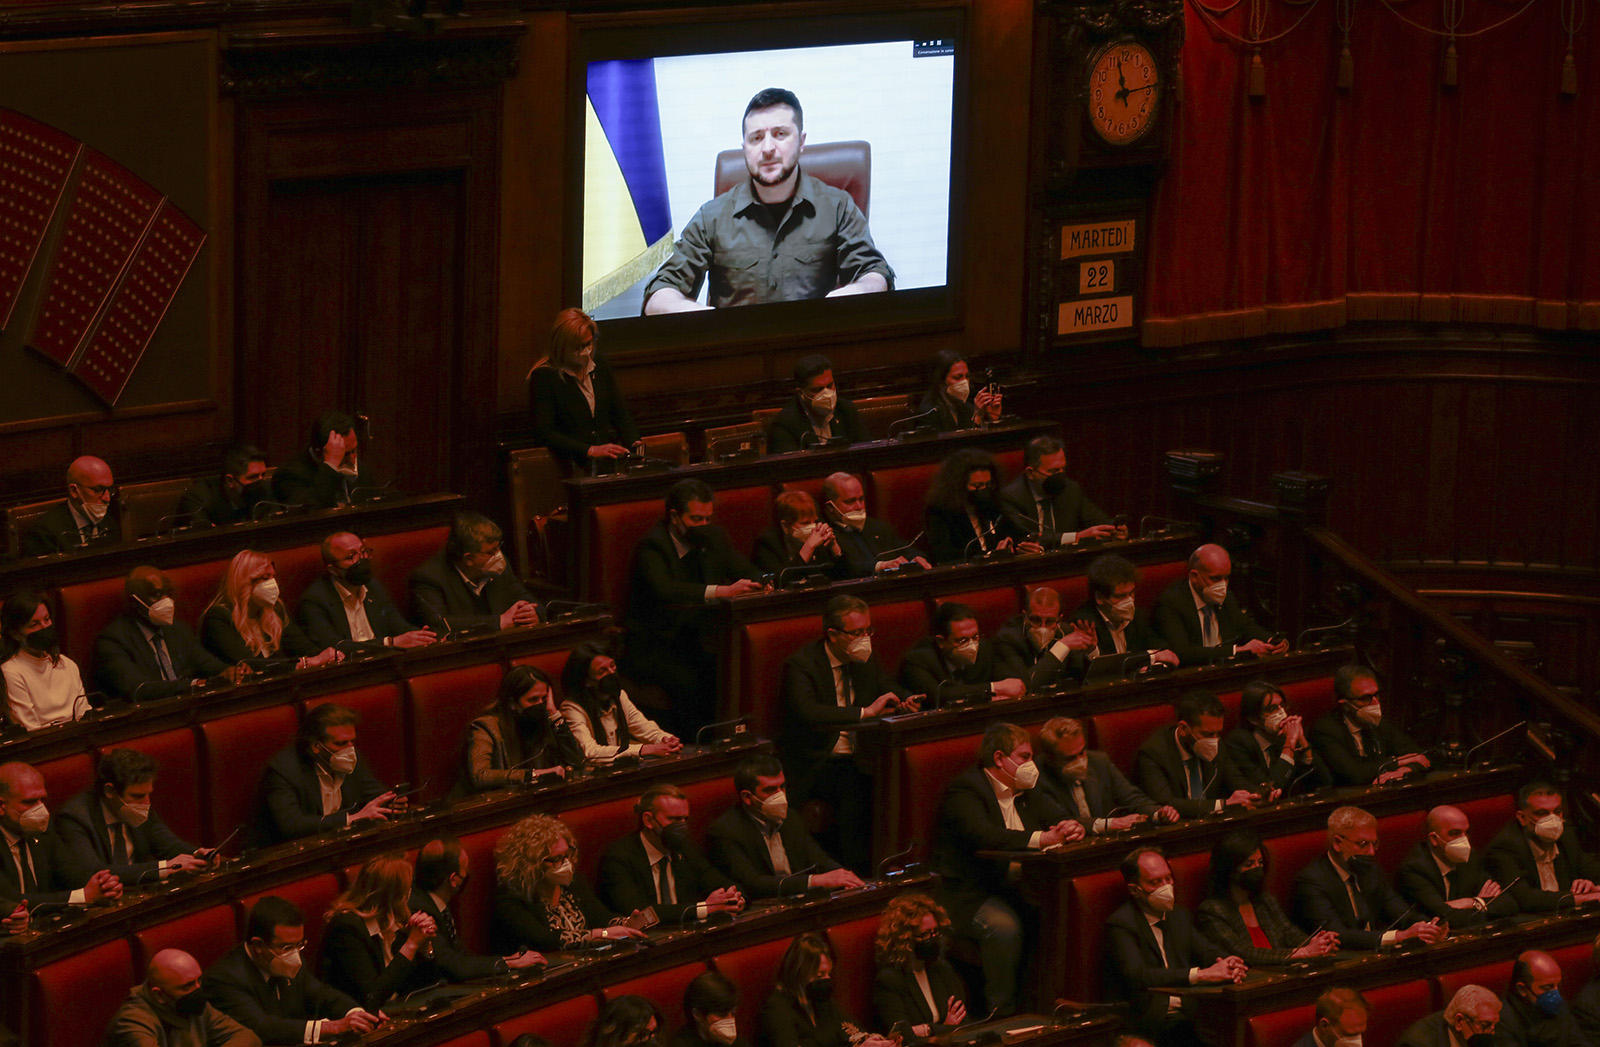 Members of the Italian Parliament and government listen to Ukraine President Volodymyr Zelensky during his virtual address to the parliament in Rome, Italy on March 22.